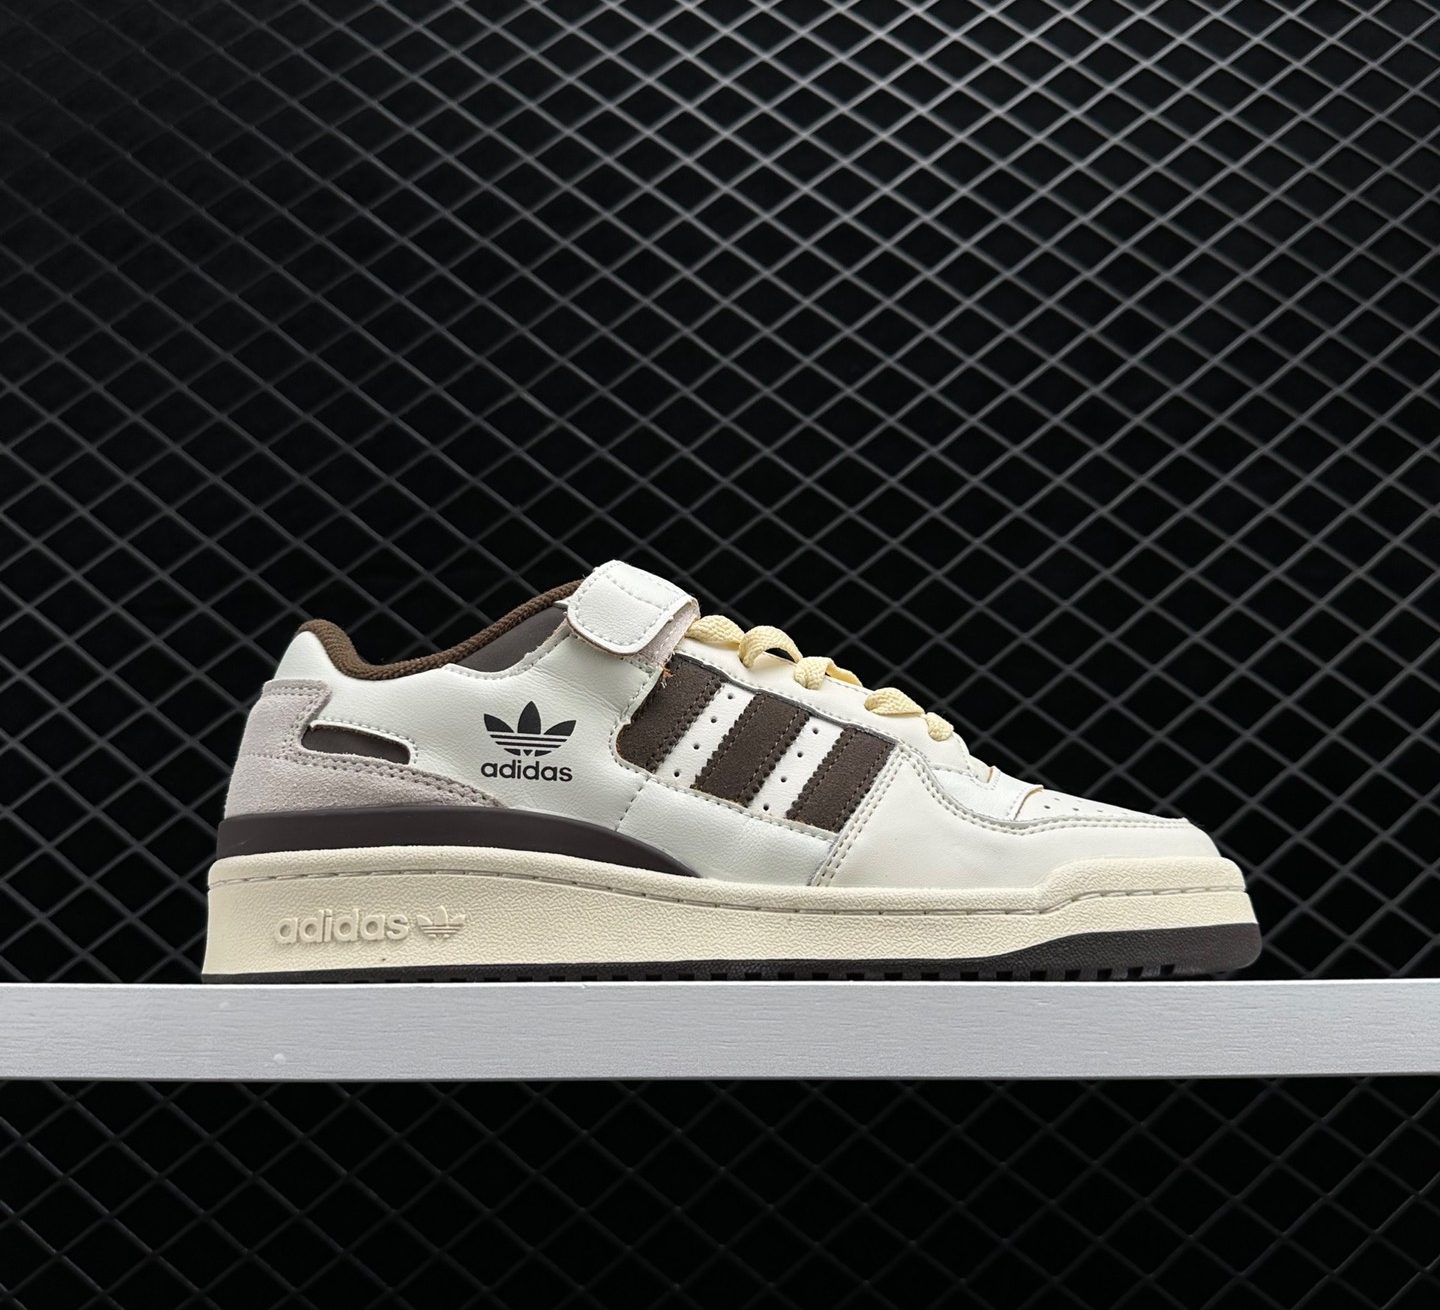 Adidas Forum 84 Low 'Off White Brown' GX4567 – Shop Now for Retro Style